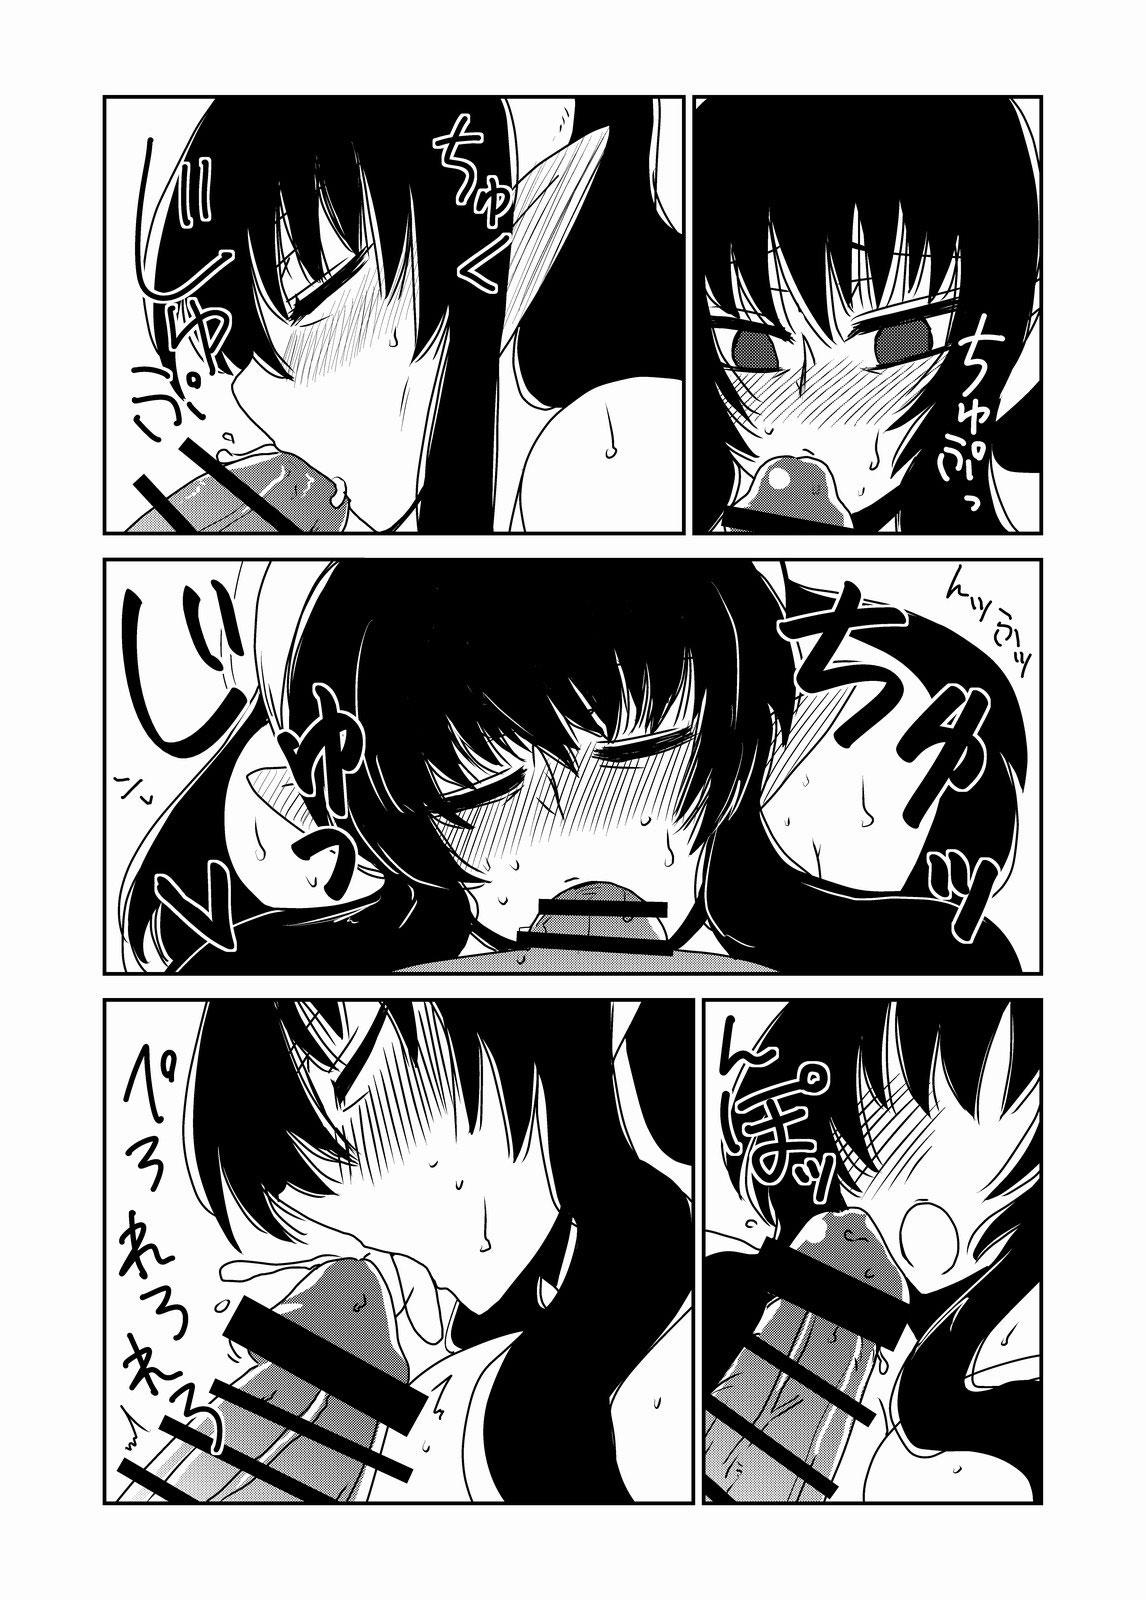 Best Blowjob Ever Succubus na Okaa-san. | Succubus Mother Funny - Page 7